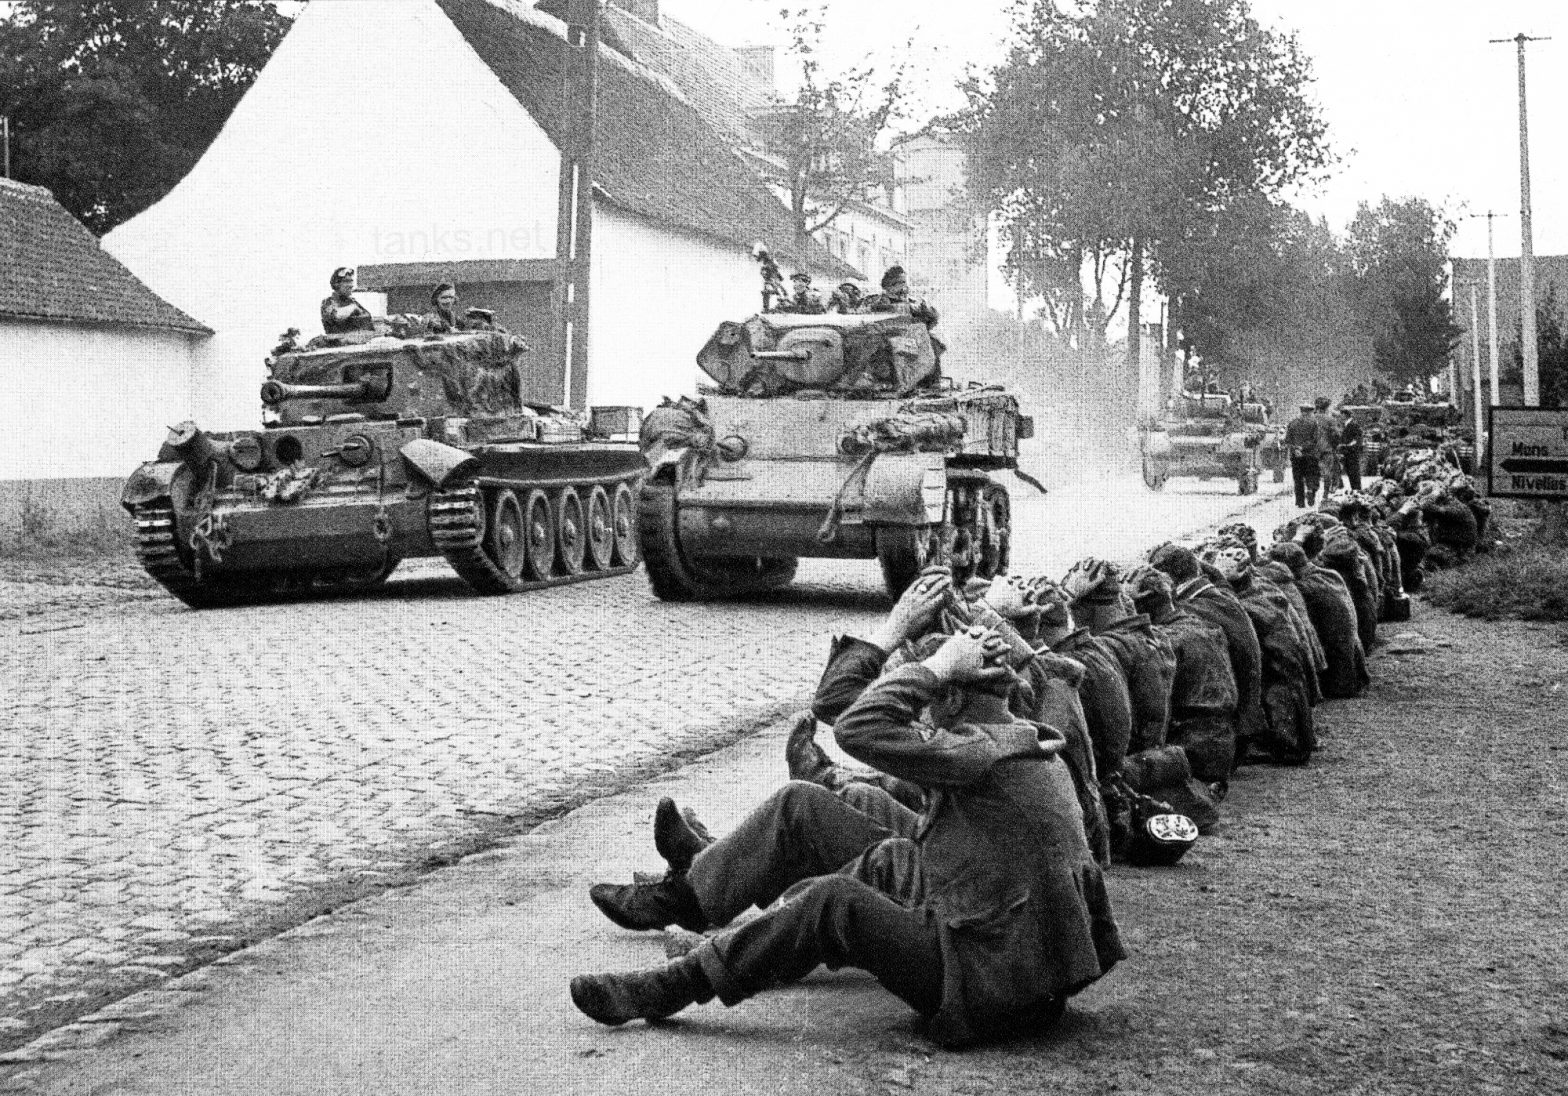 A27M Cruiser Tank Mark VIII Cromwell, seen here on the left rolling into Belgium past German prisoners of war